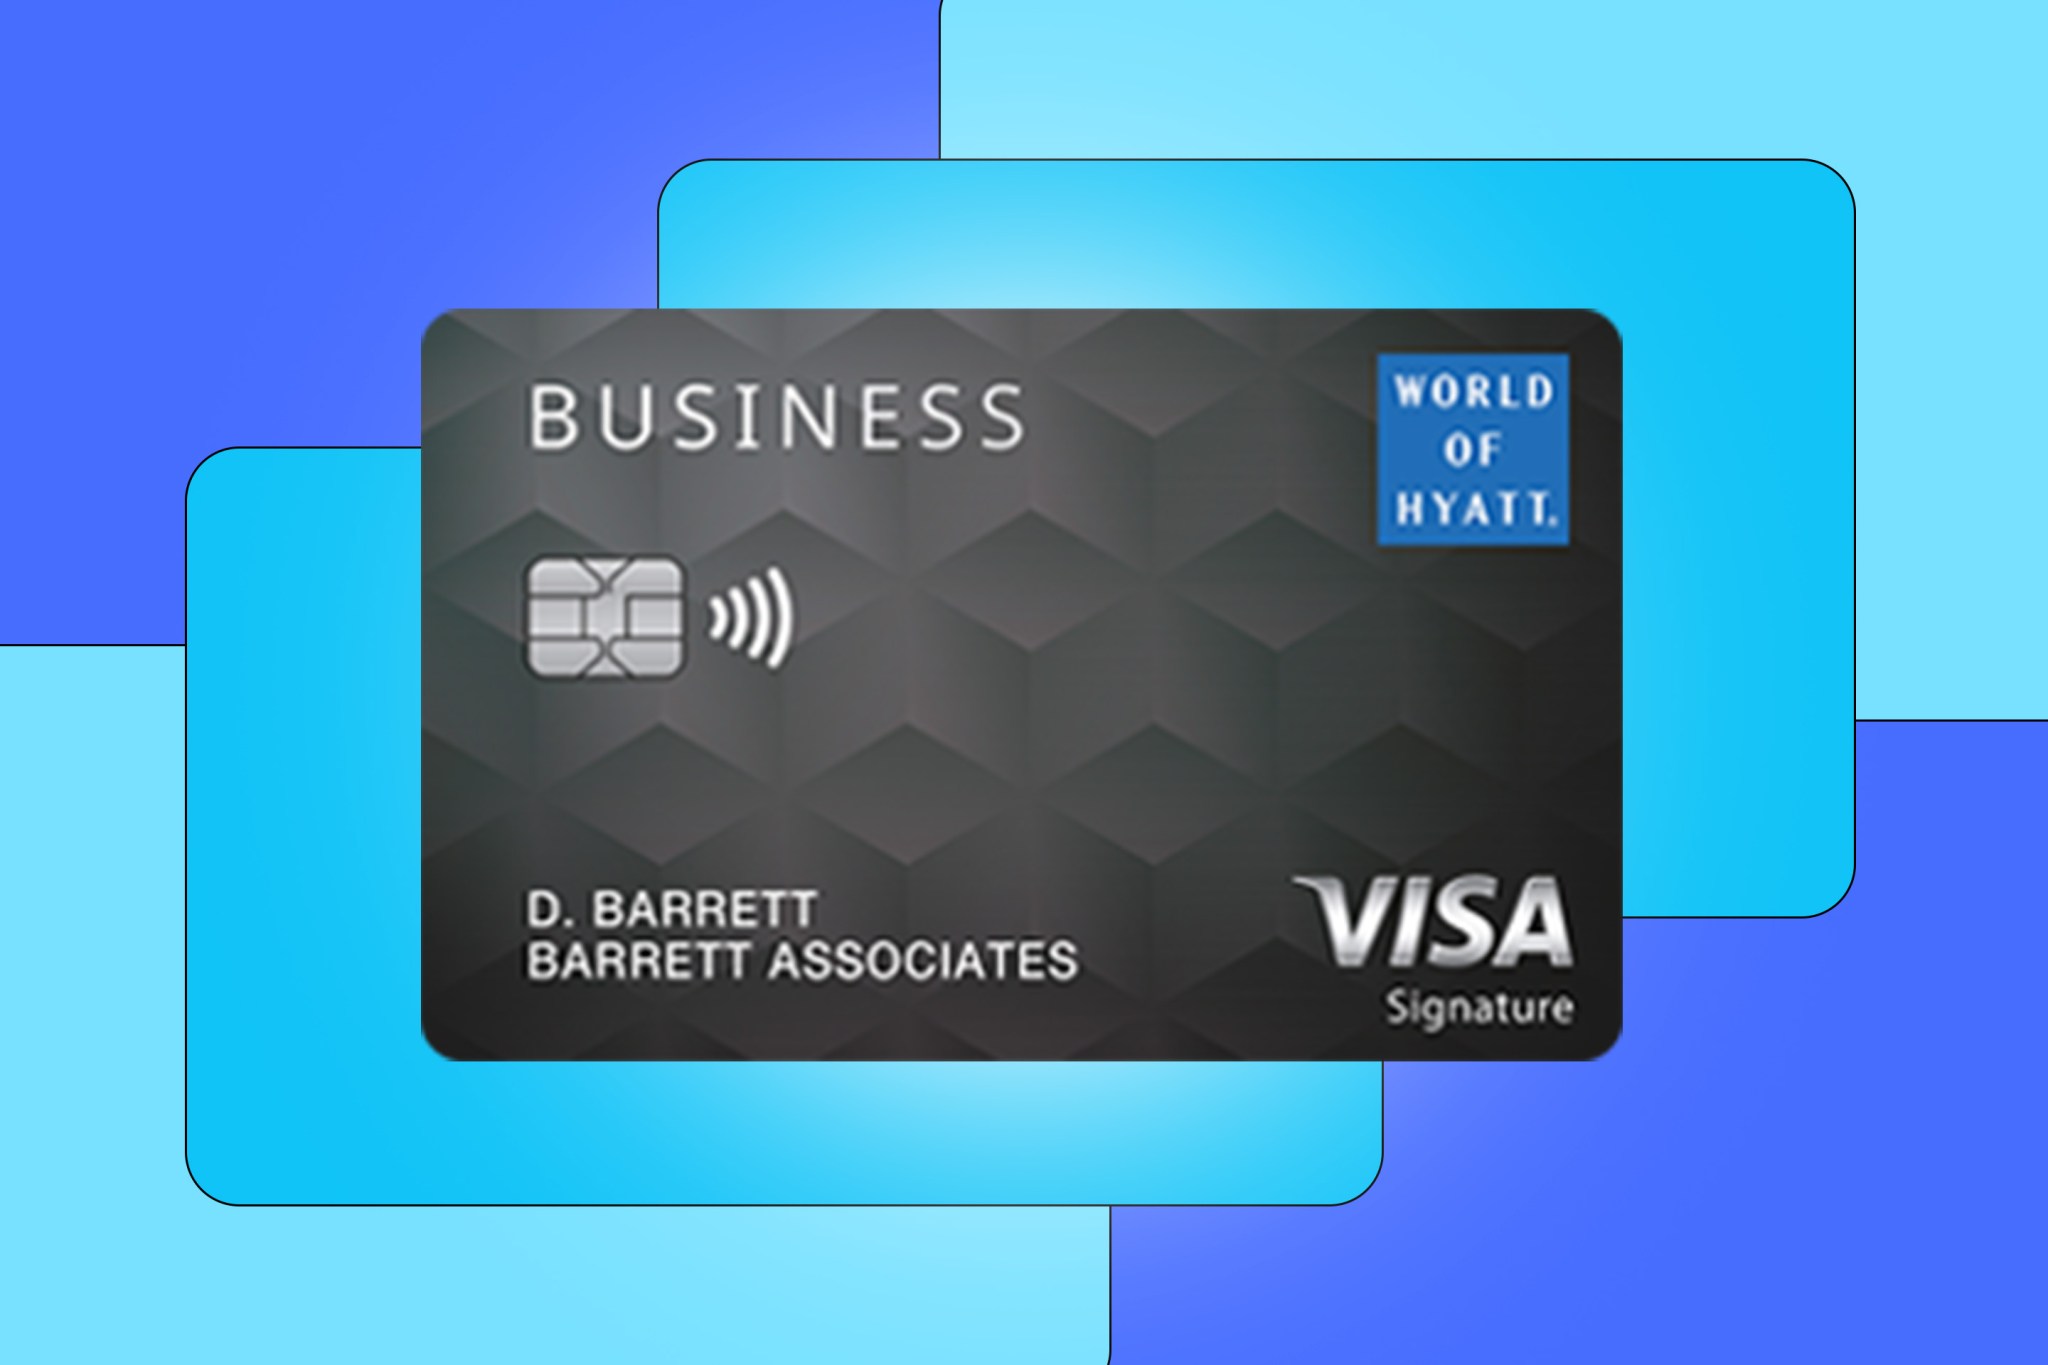 World of Hyatt Business Card Review: An obvious addition to your corporate wallet if you’re already booking Hyatt for business.